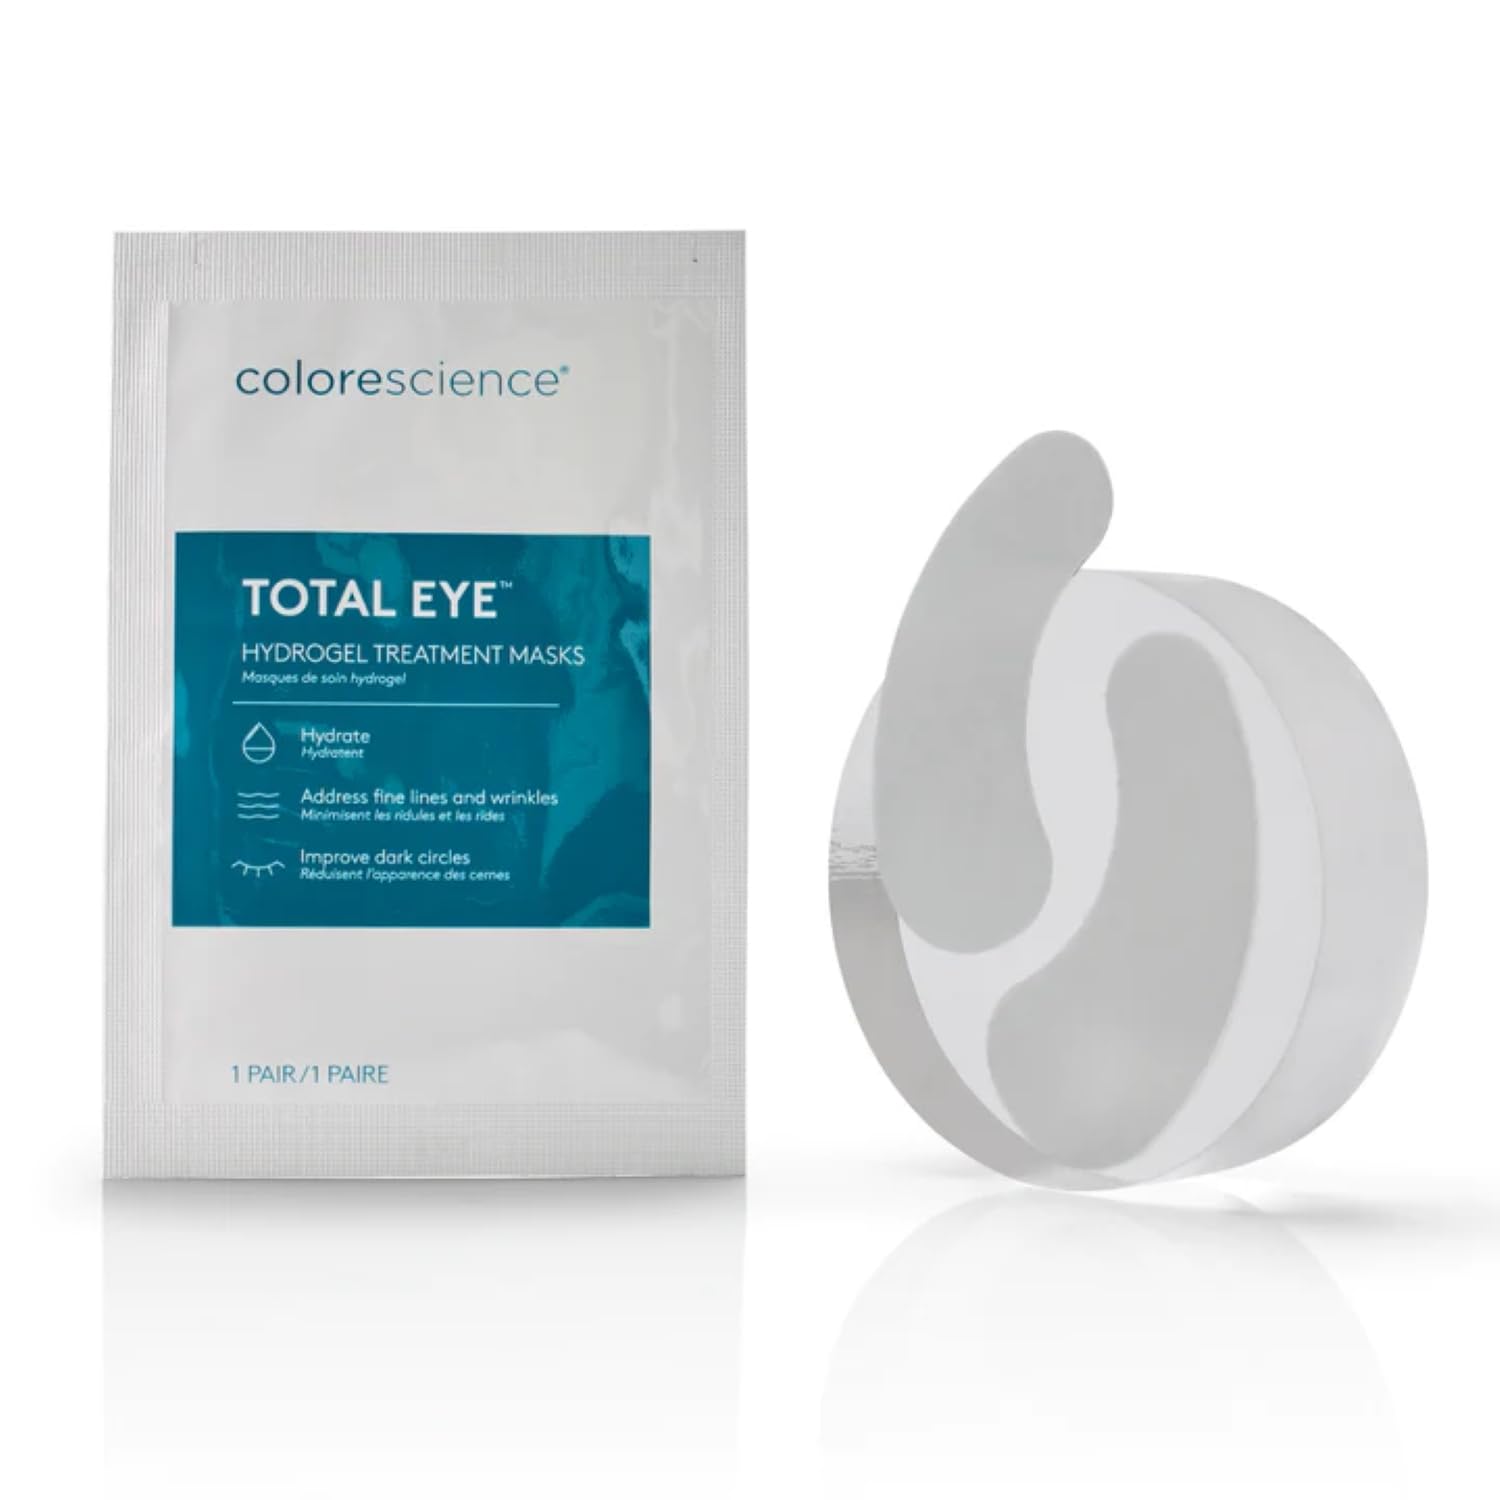 Hydrogel Treatment Eye Masks from Colorescience